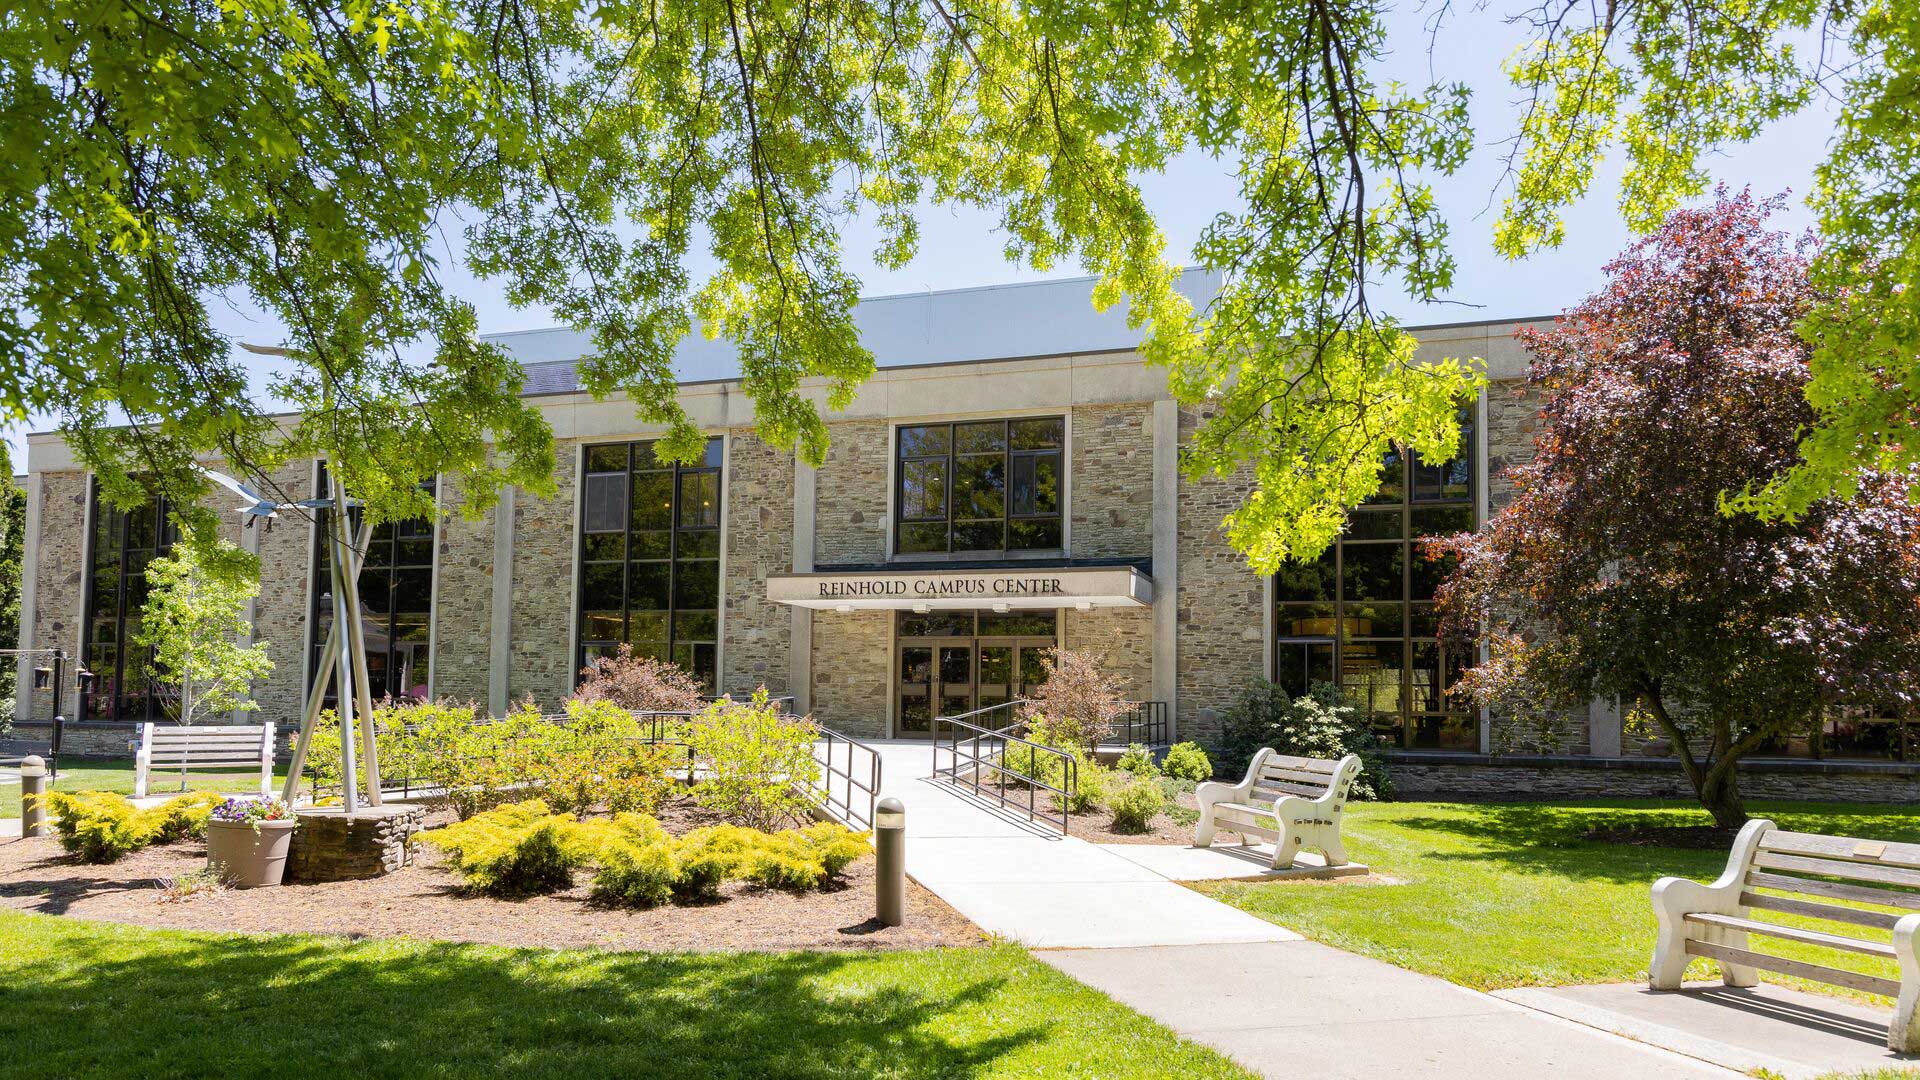 Exterior view of the Campus Center on Houghton's campus.